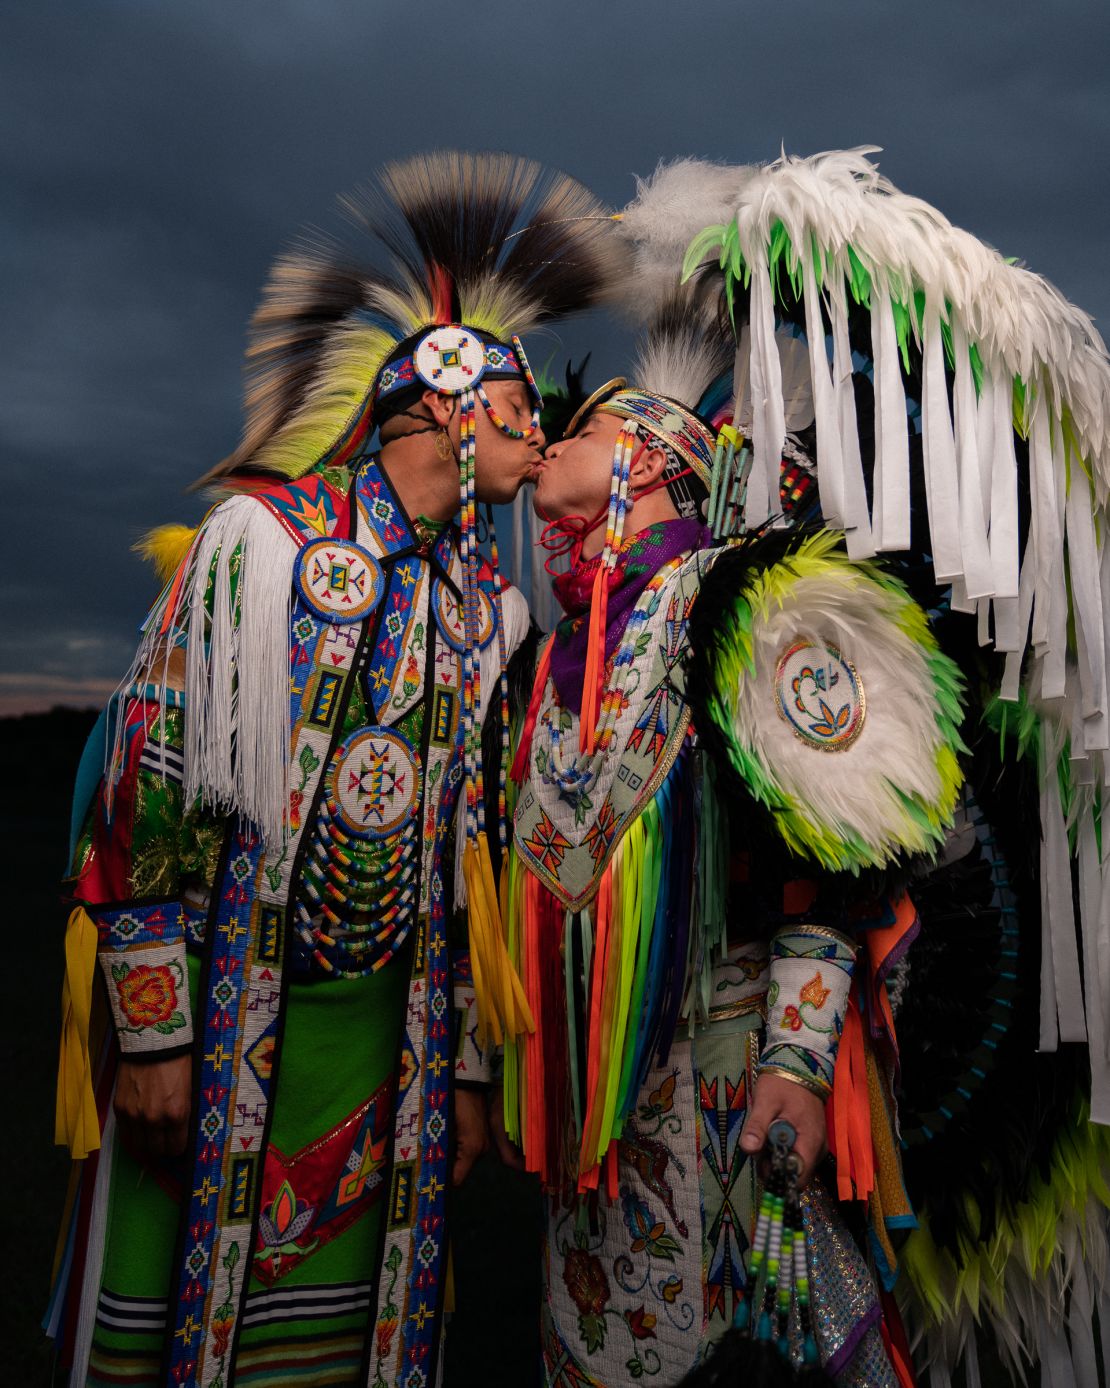 Two-Spirit couple Adrian Matthias Stevens and Sean Snyder are changing cultural expectations through dance.